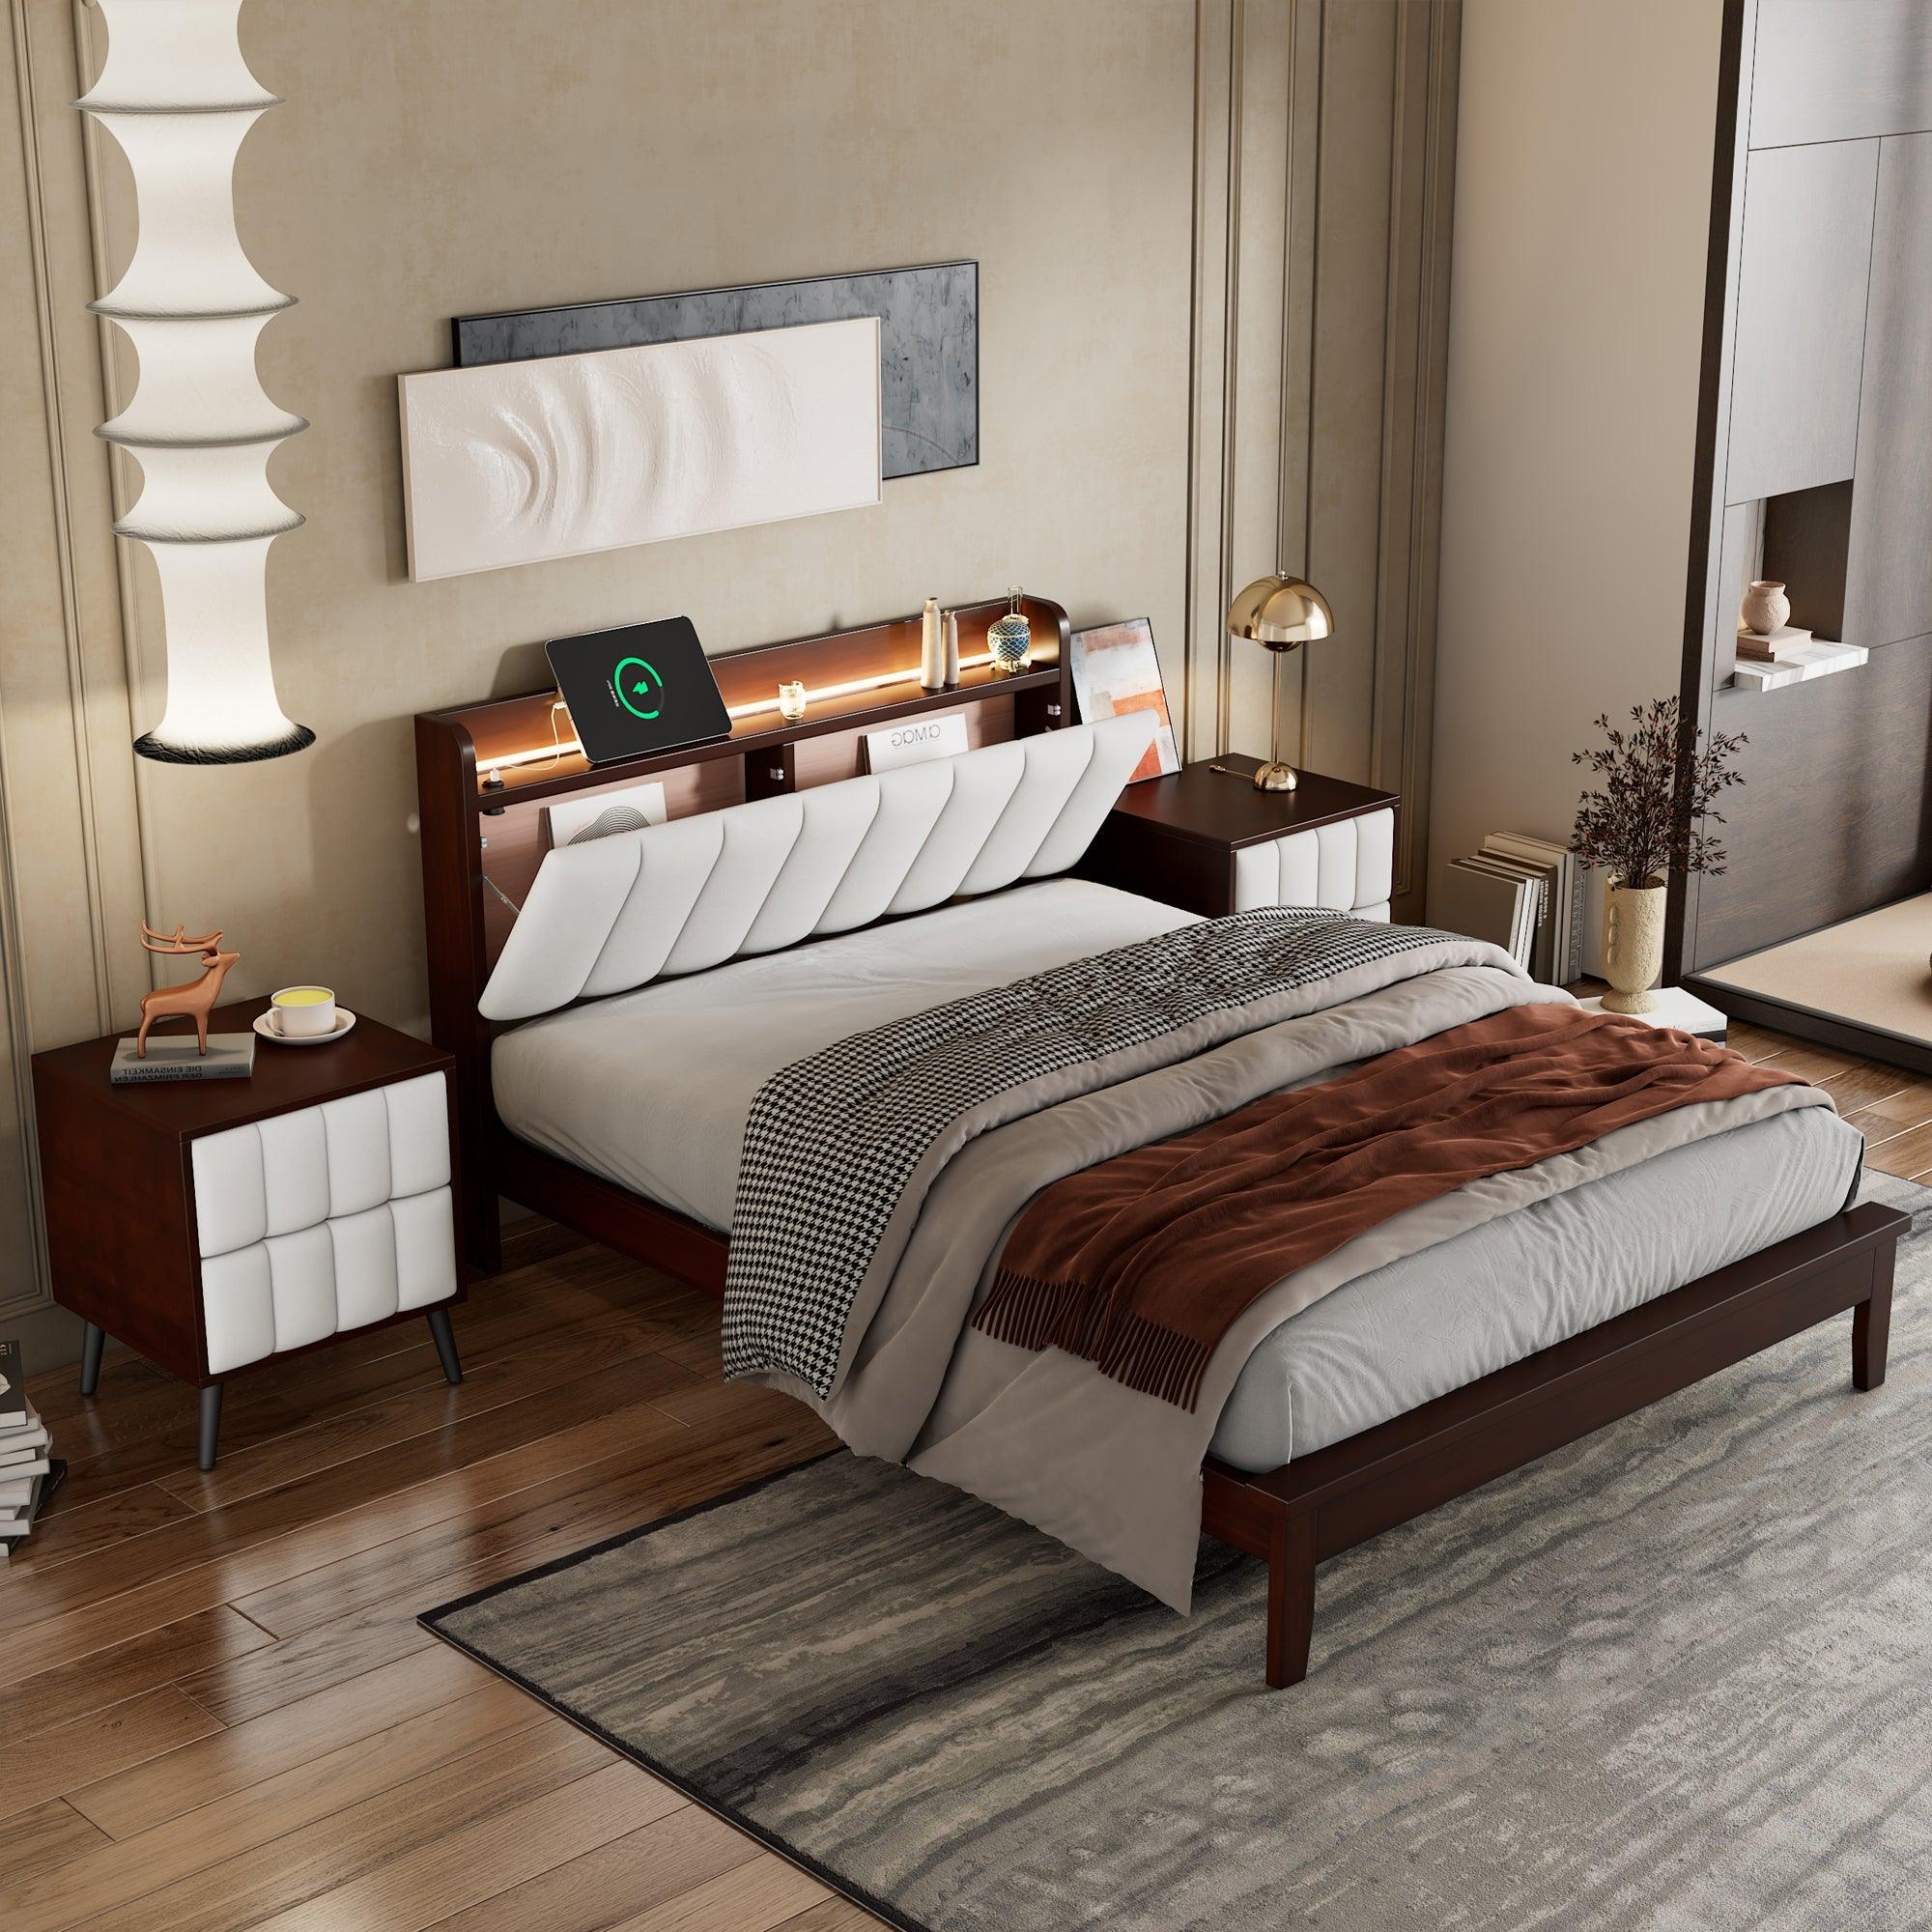 3-Pieces Bedroom Sets, Full Size Wood Platform Bed and Two Nightstands, Storage Platform bed with USB and LED Lights-Walnut+Beige LamCham